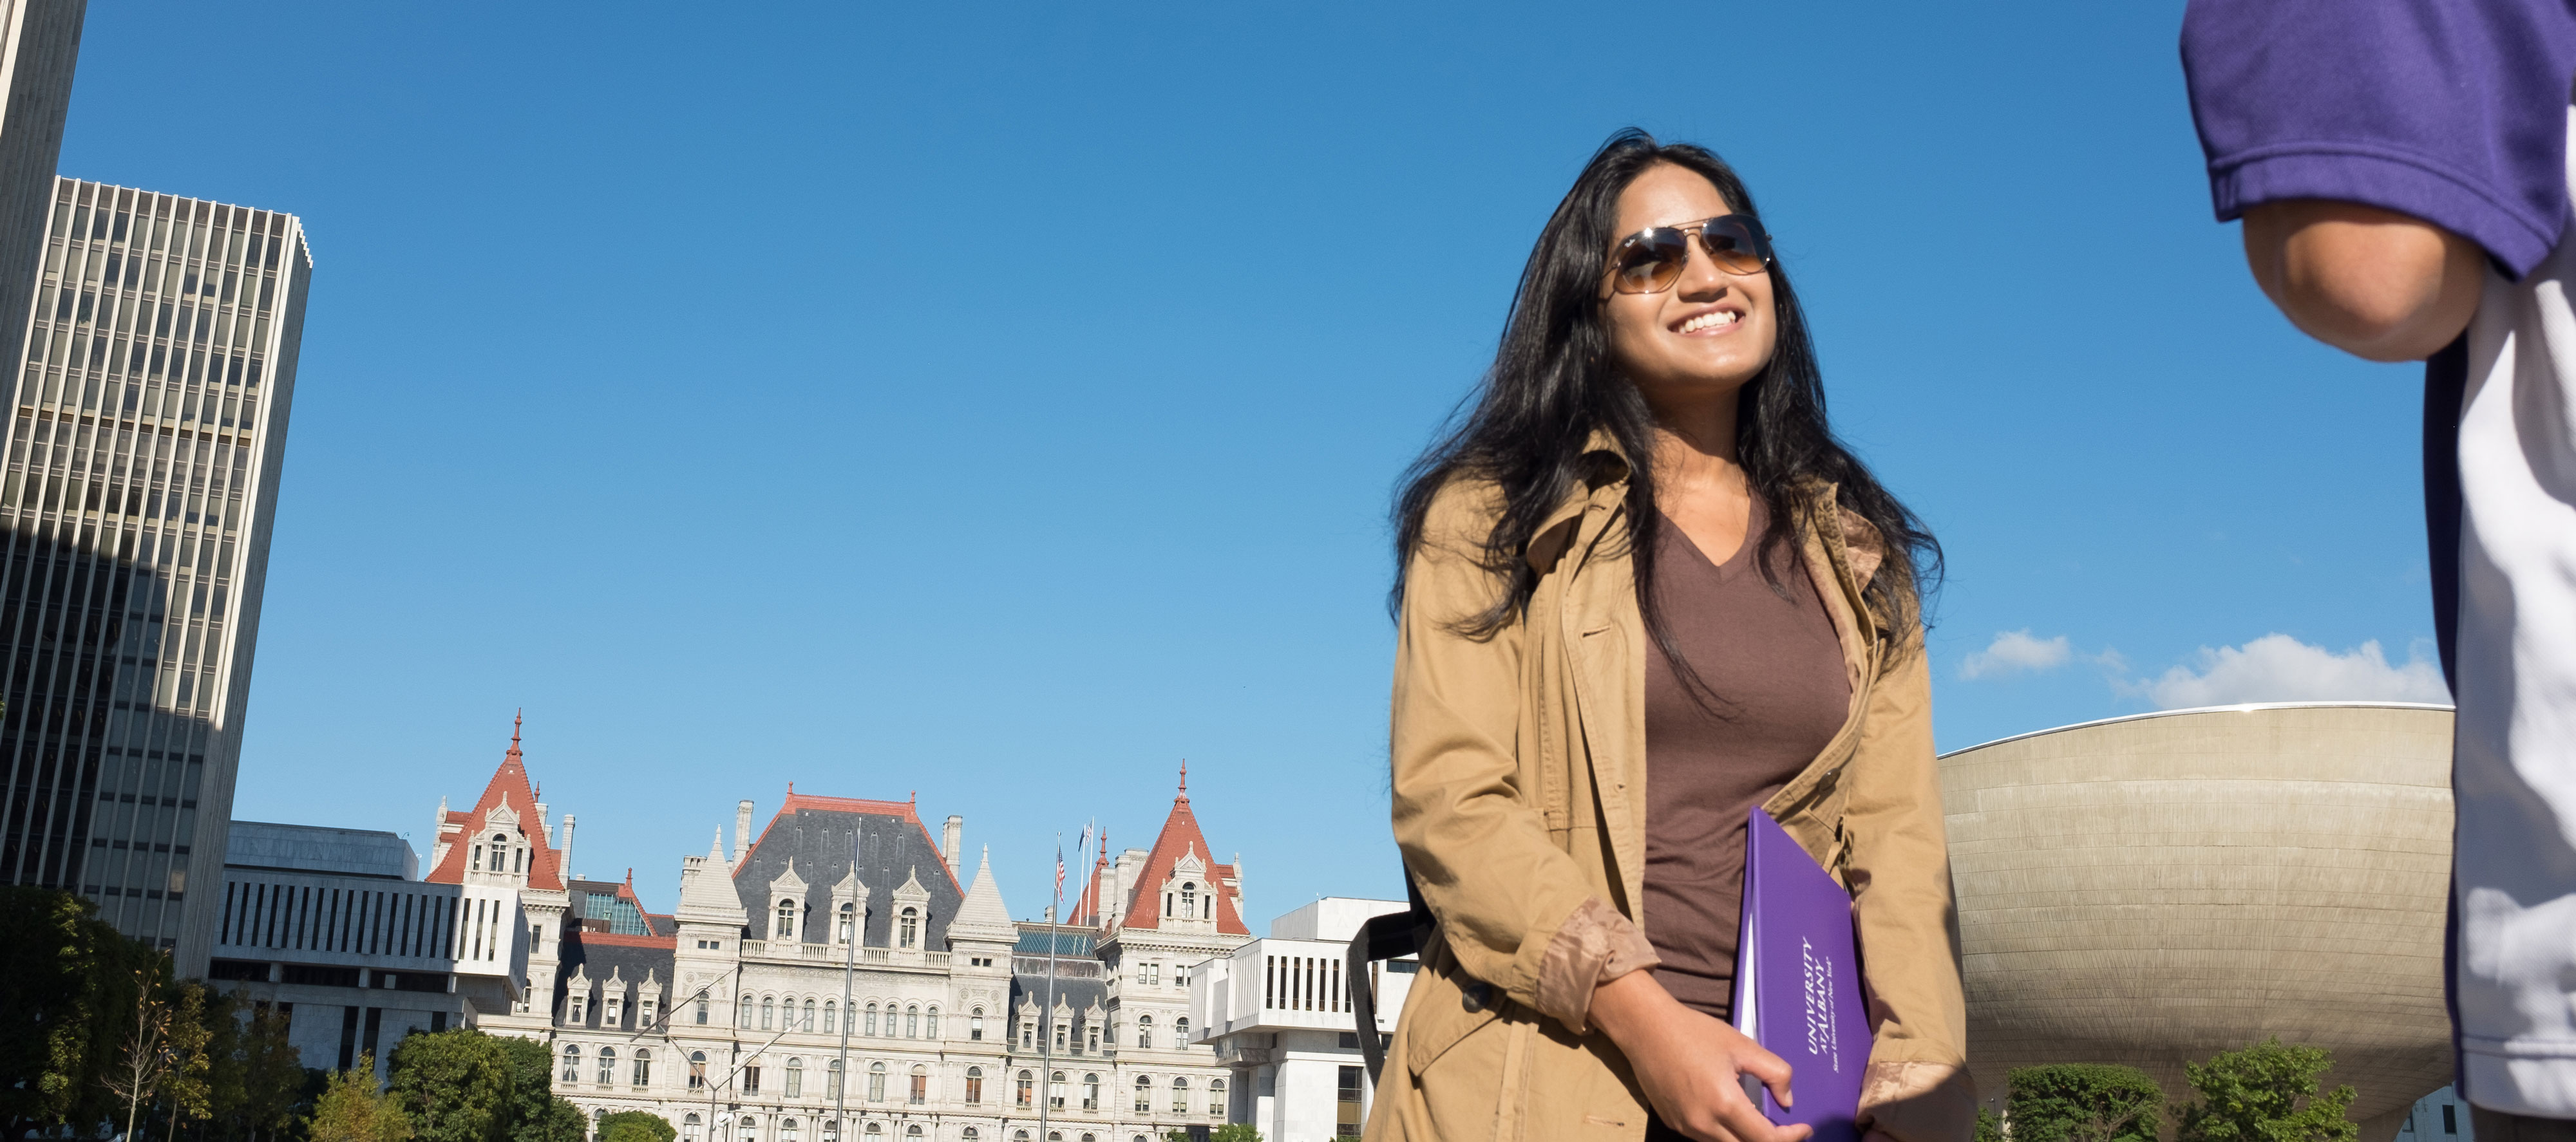 A student wearing sunglasses and a light coat smiles as she stands in front of the New York State Capitol building.